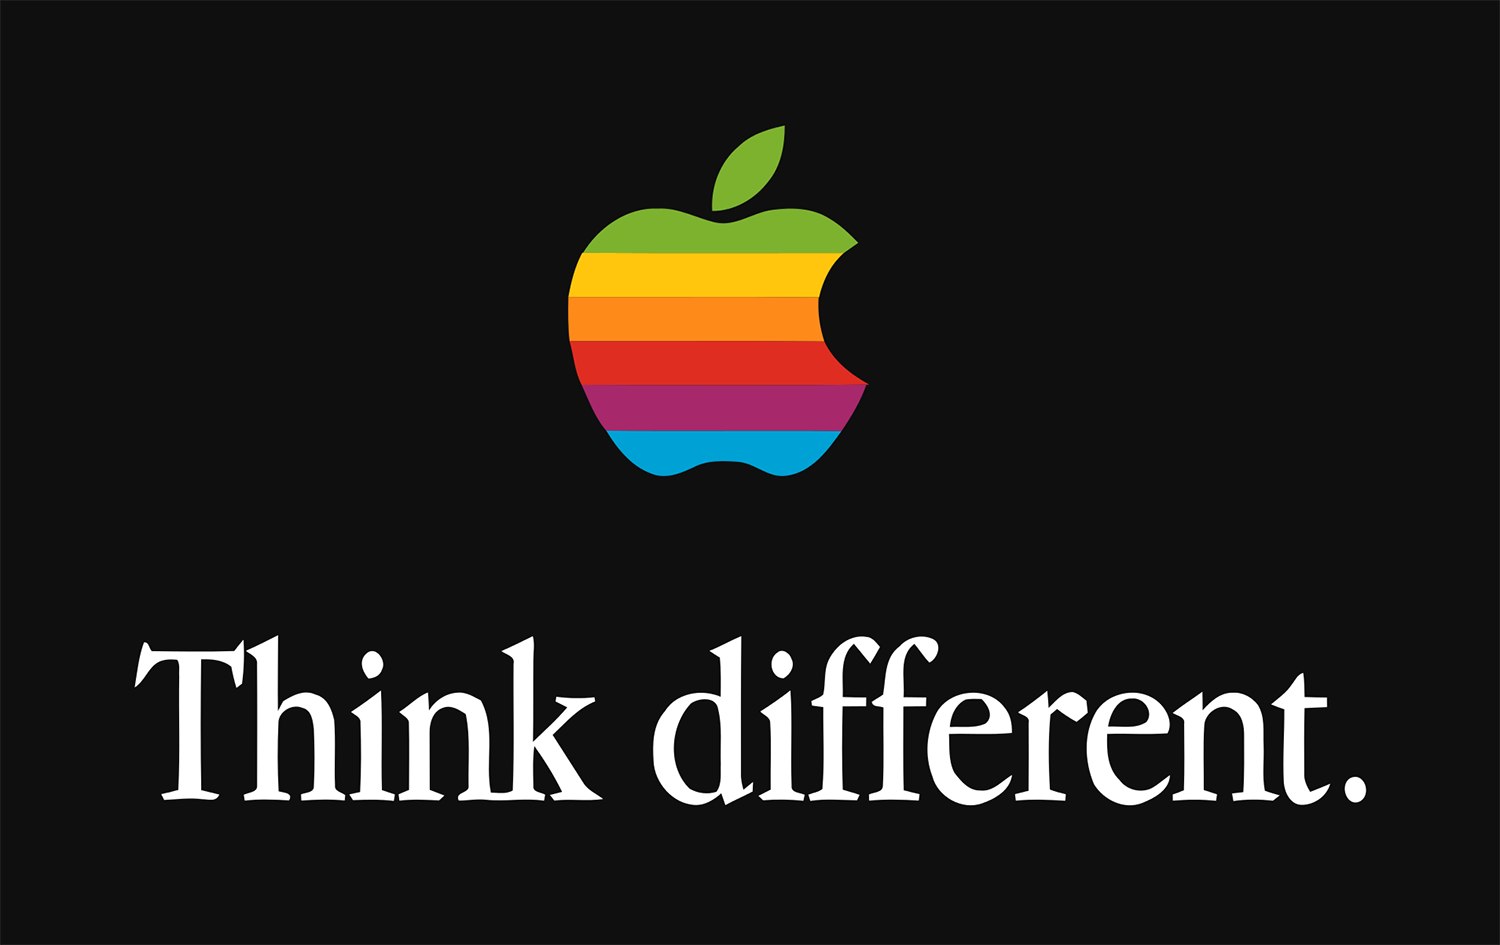 Apple's Think Different campaign featuring Garamond as the typeface